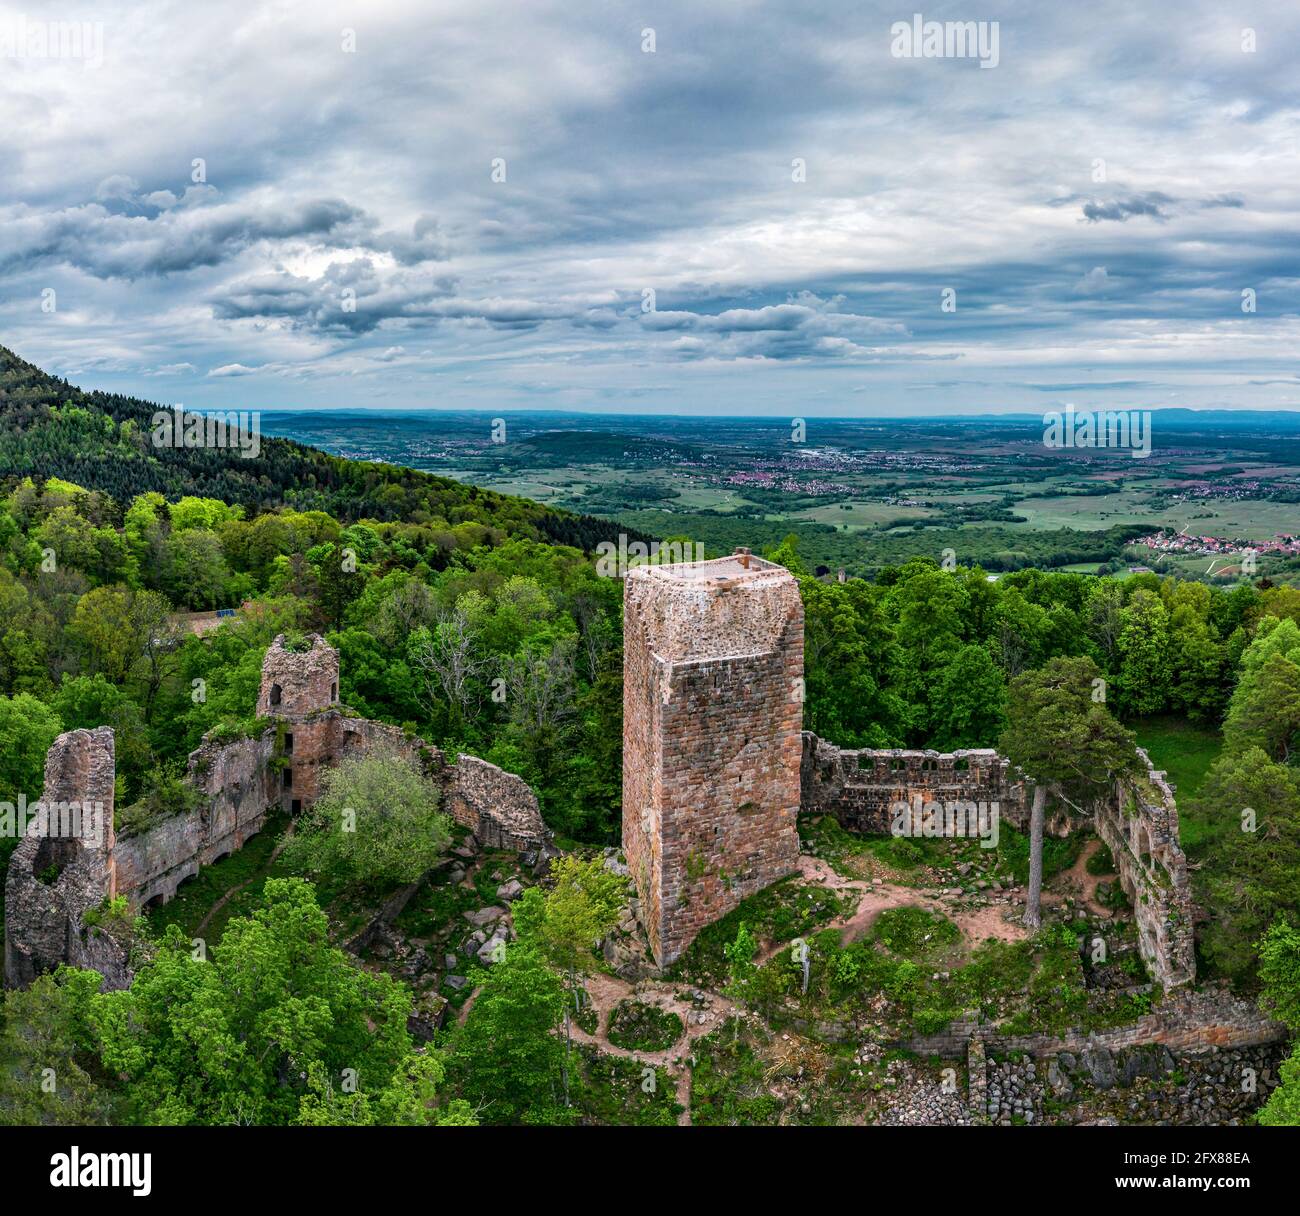 Medieval Castle Landsberg in Vosges, Alsace. Aerial view of the castle ruins, filmed from a drone. France Stock Photo